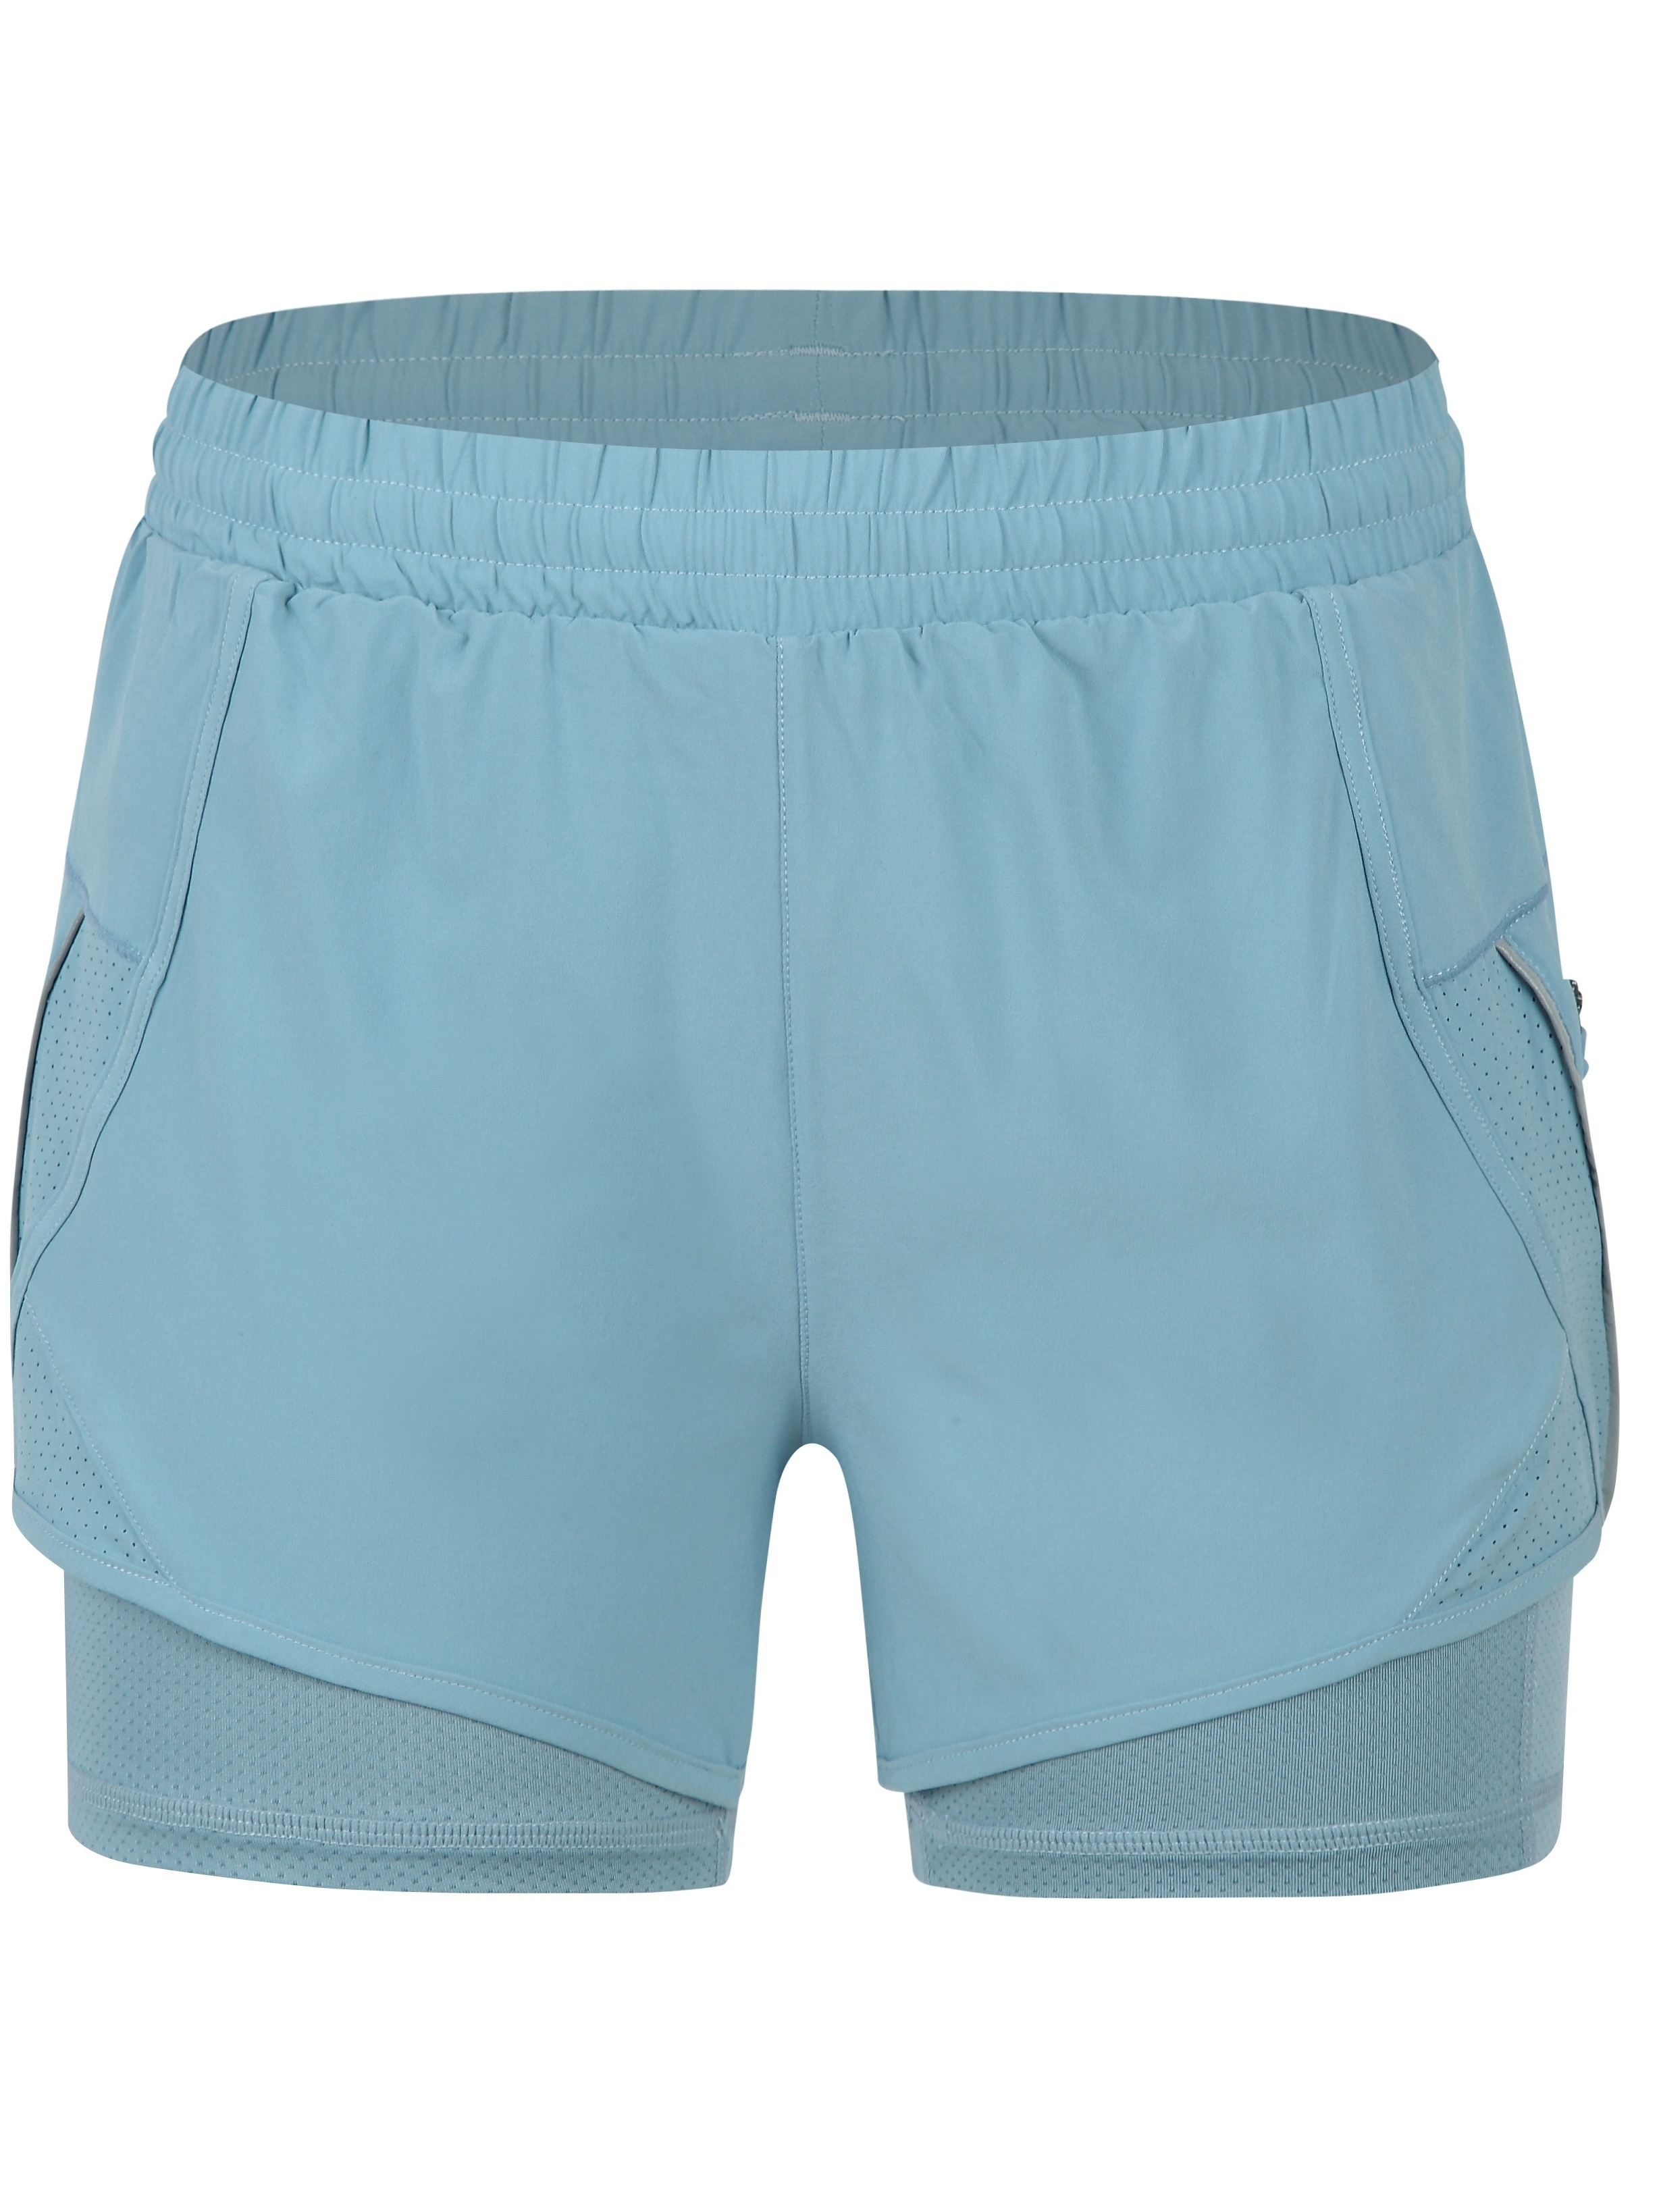 3tone Anywhere Zip Shorts - その他